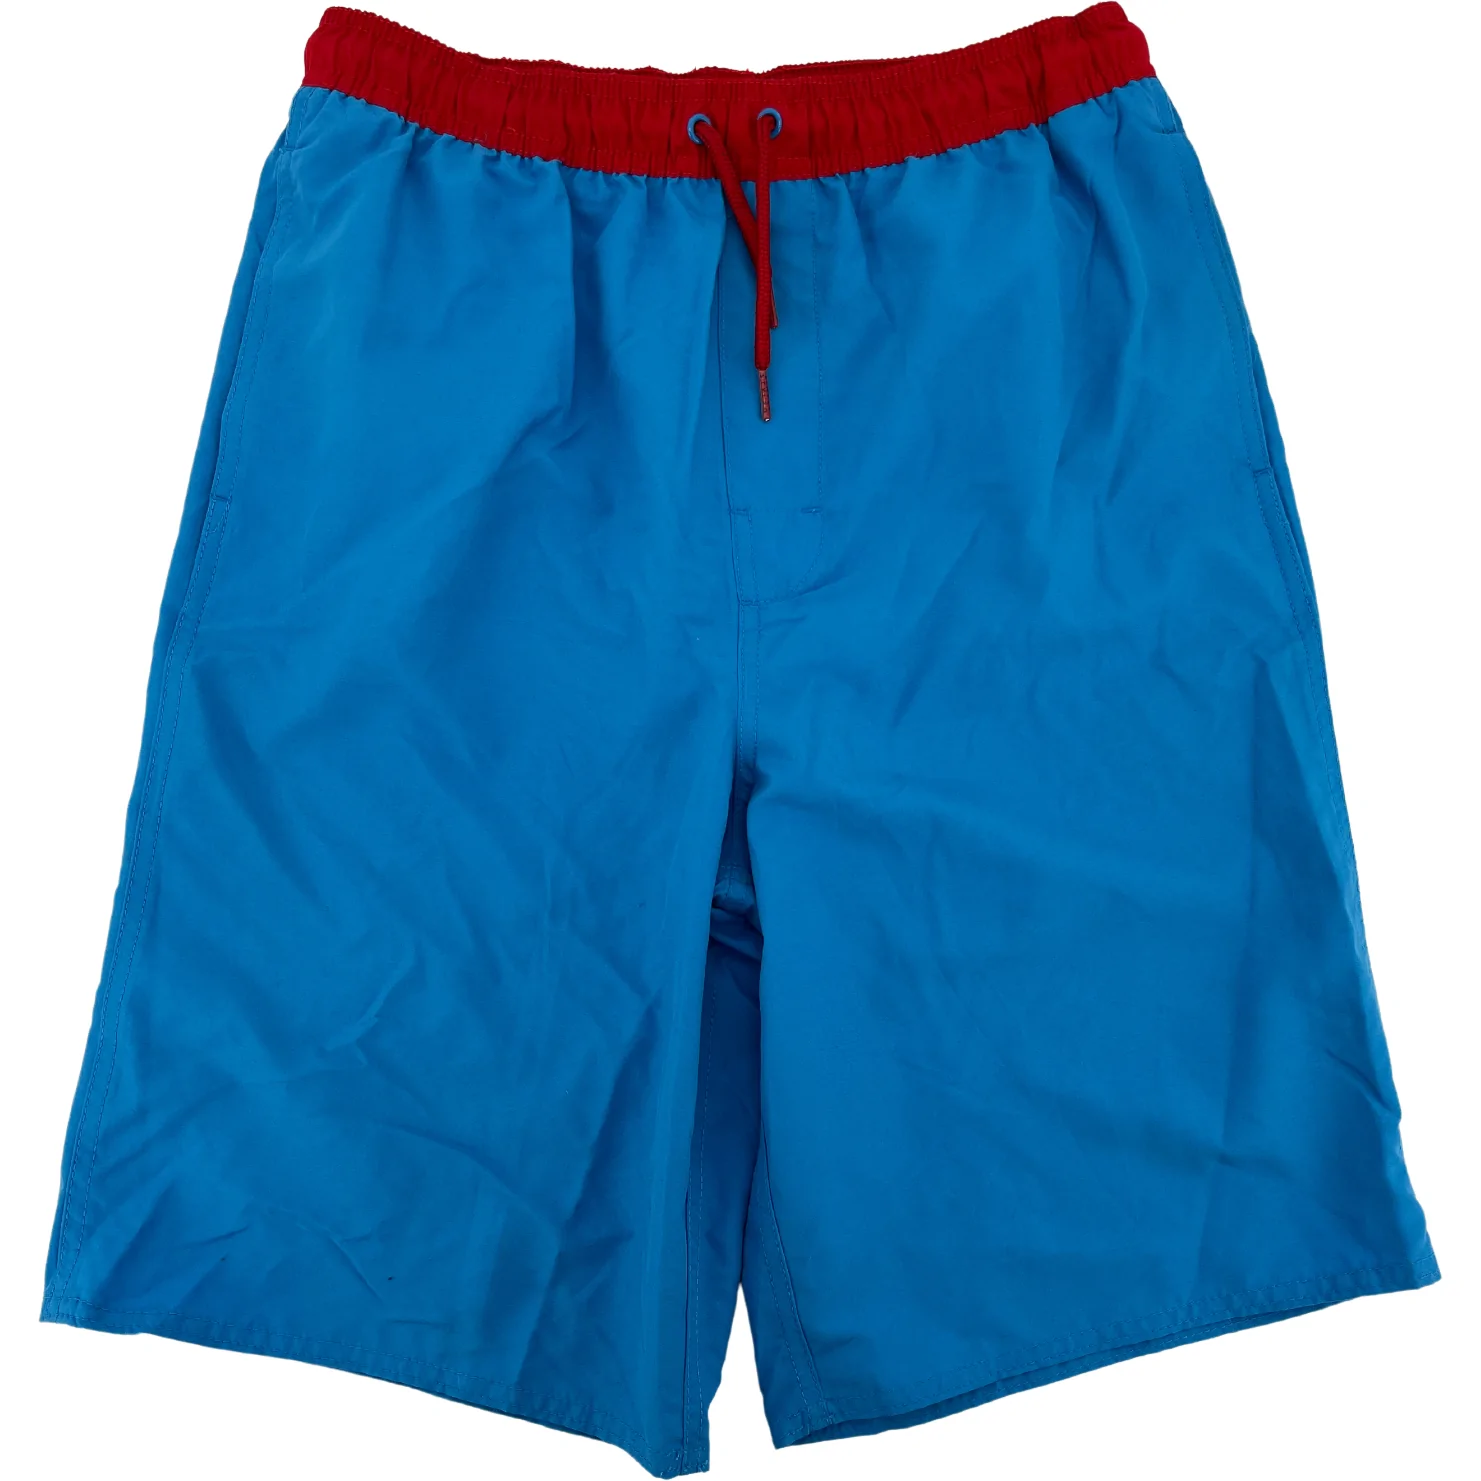 Simply Styled Children's Bathing Suit / Boy's Swim Trunks / Blue & Red / Size XLarge